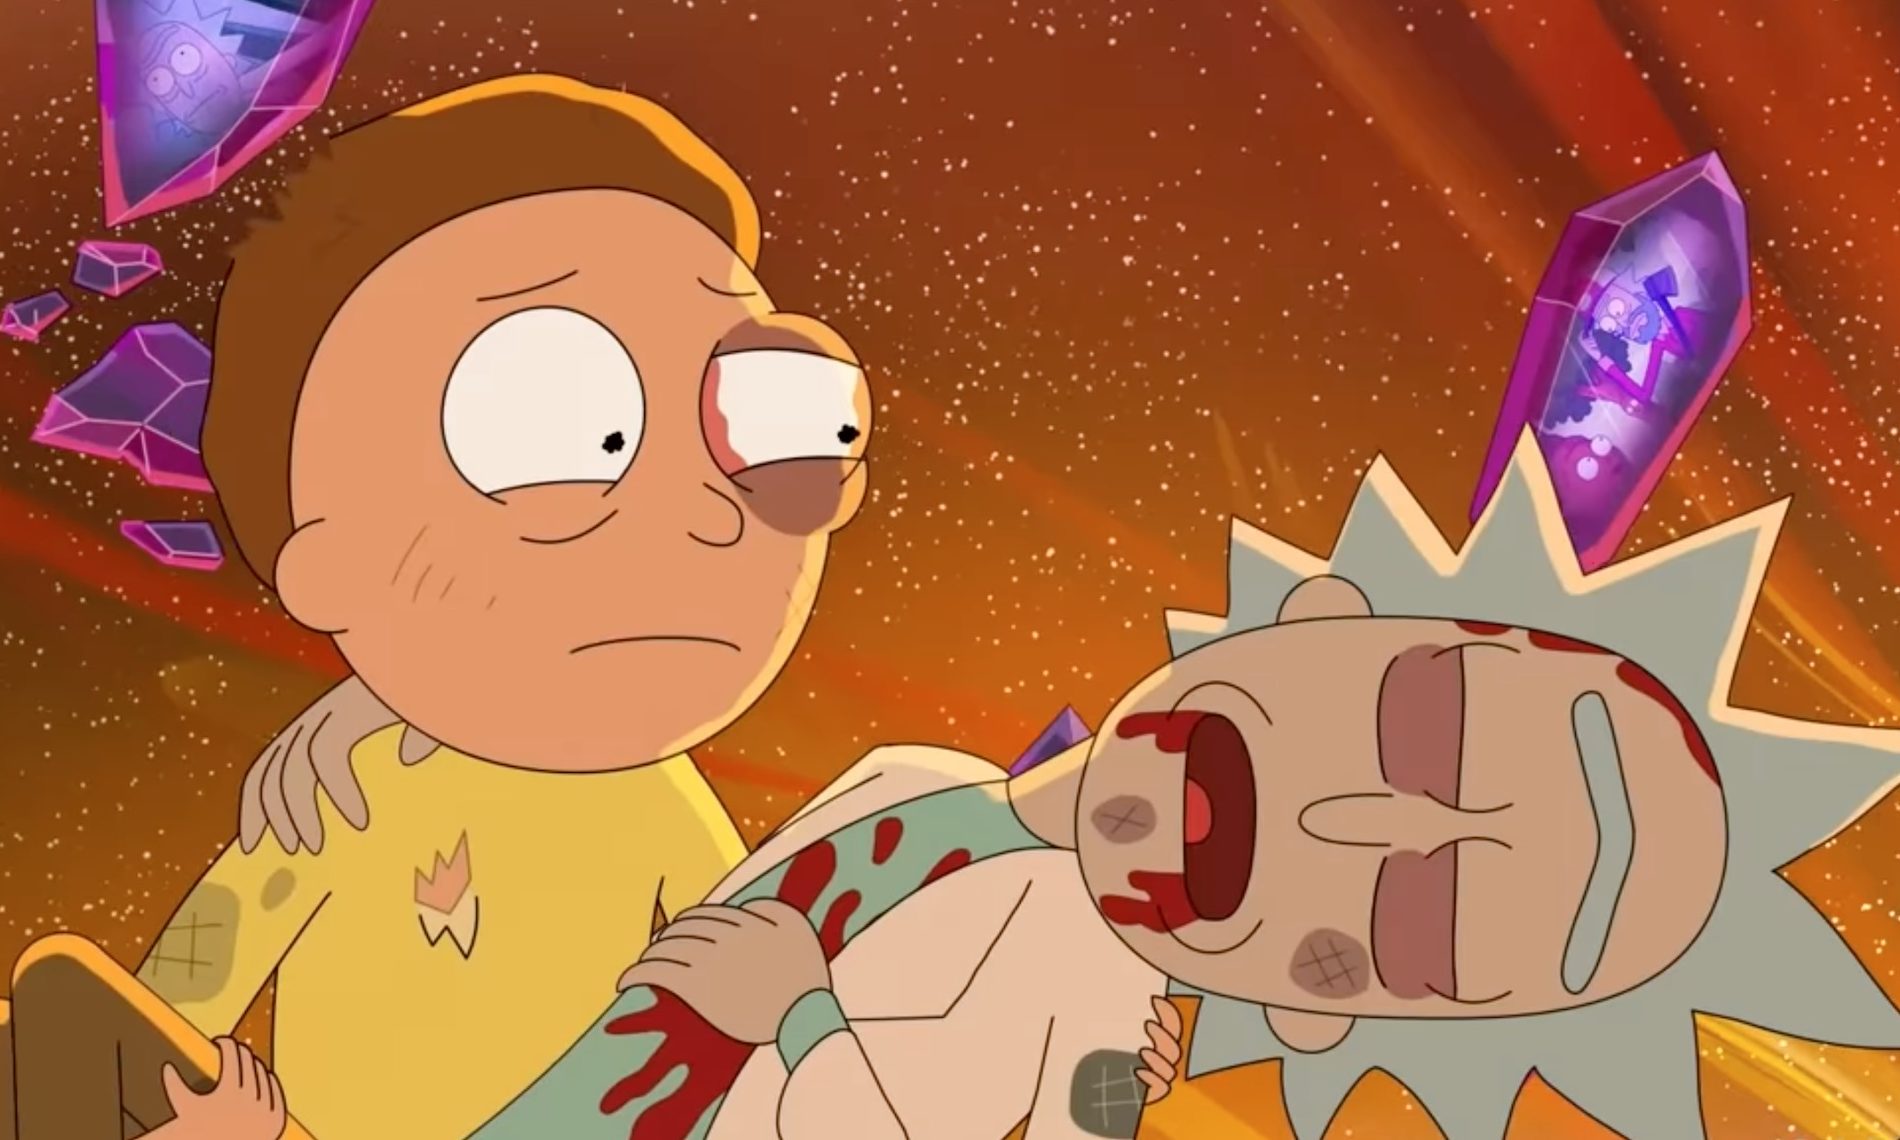 Rick and Morty': What to Expect From Season 5